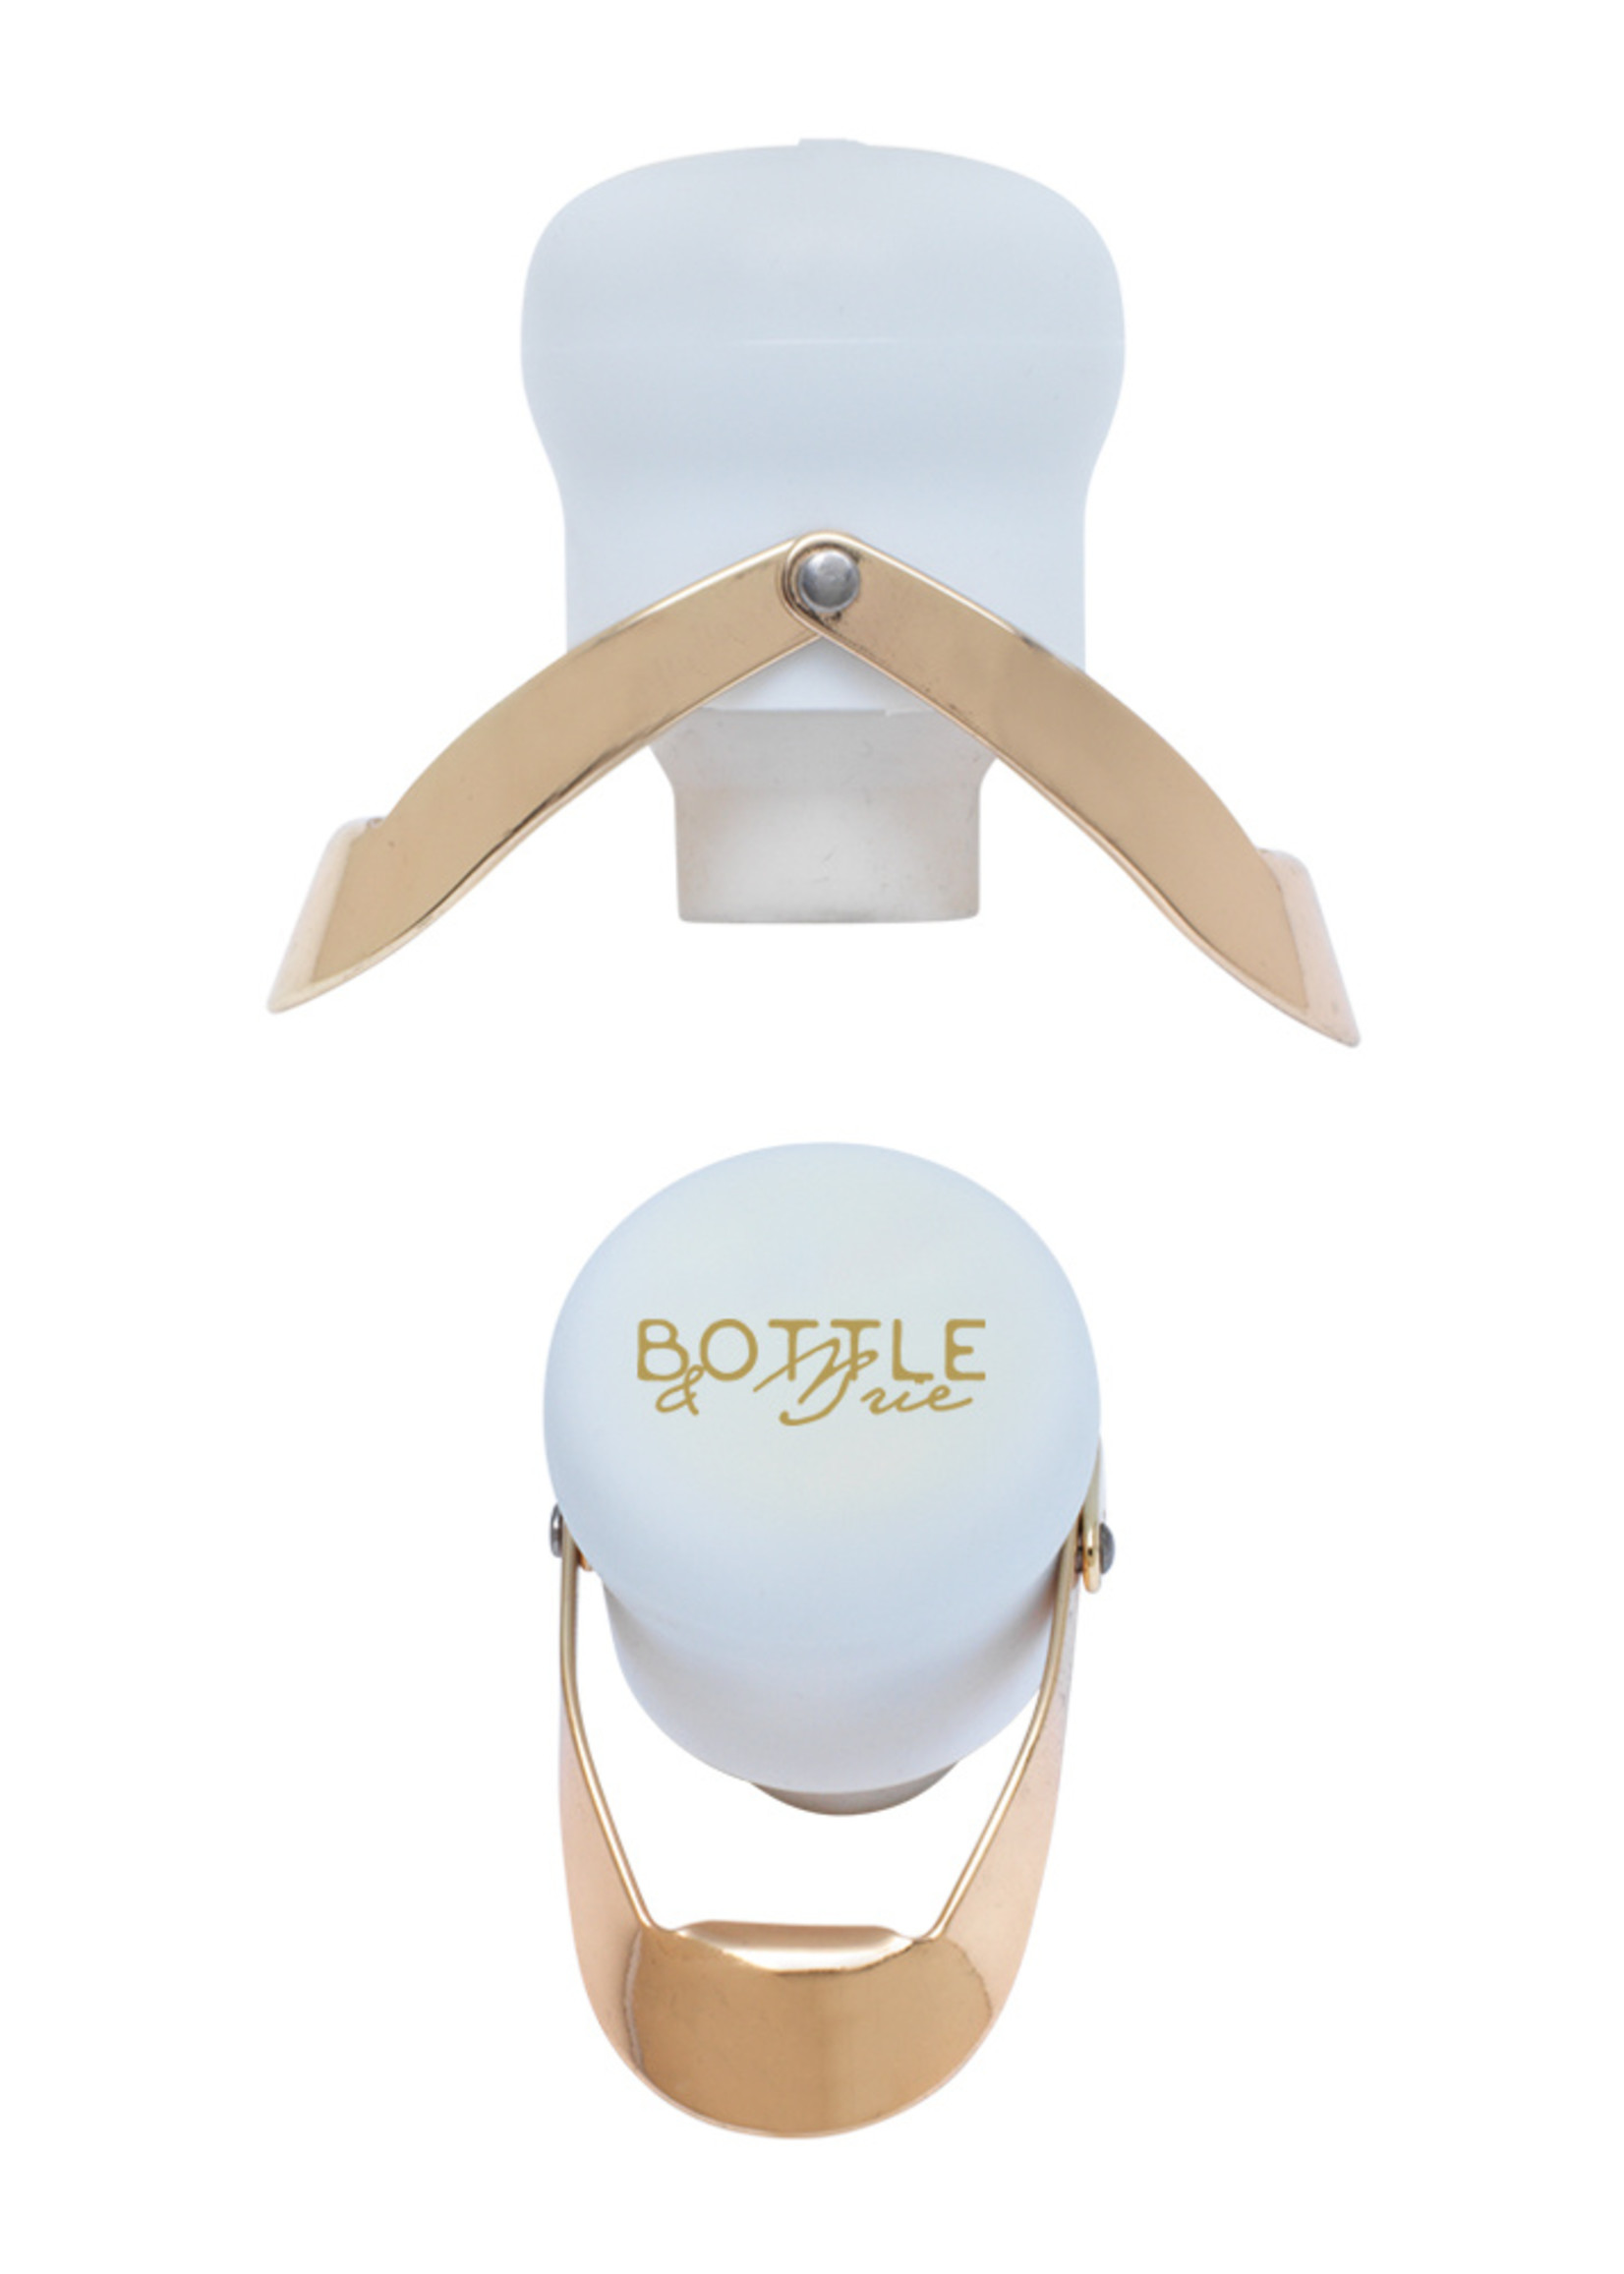 Bottle and Brie Bouchon Champagne Stopper